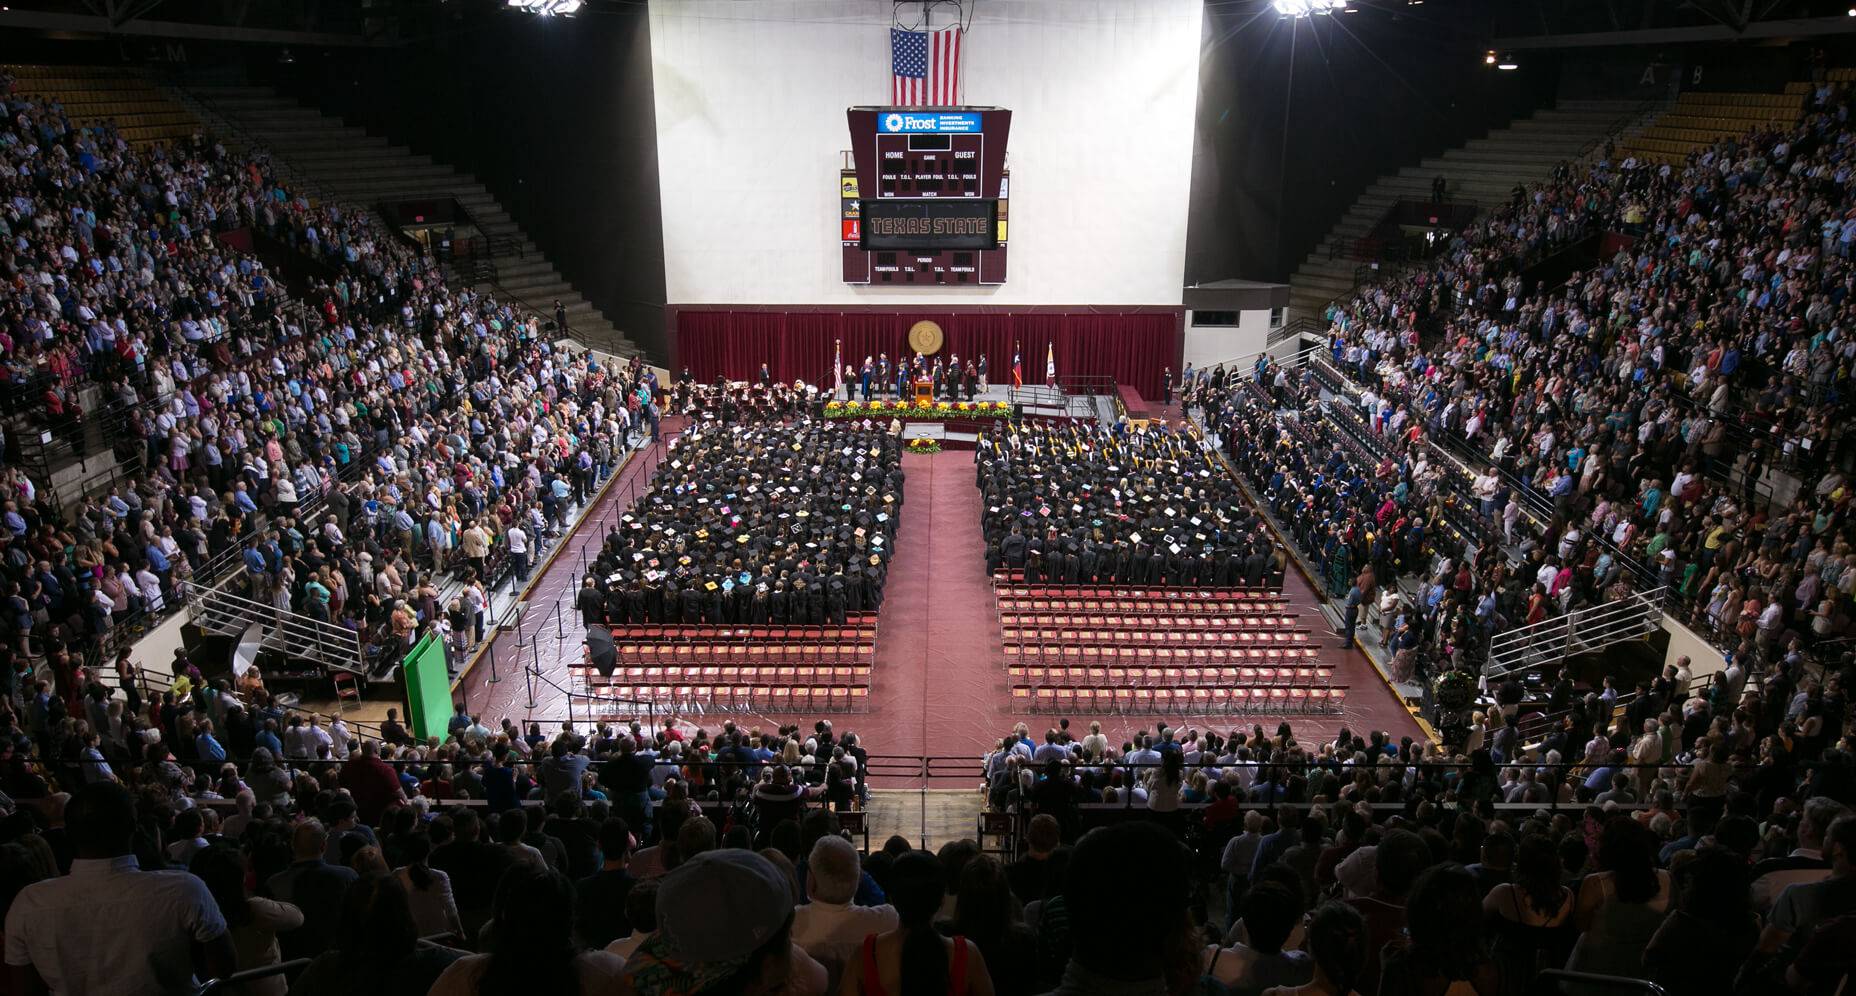 an image of Strahan Areana full of people during a commencement ceremony